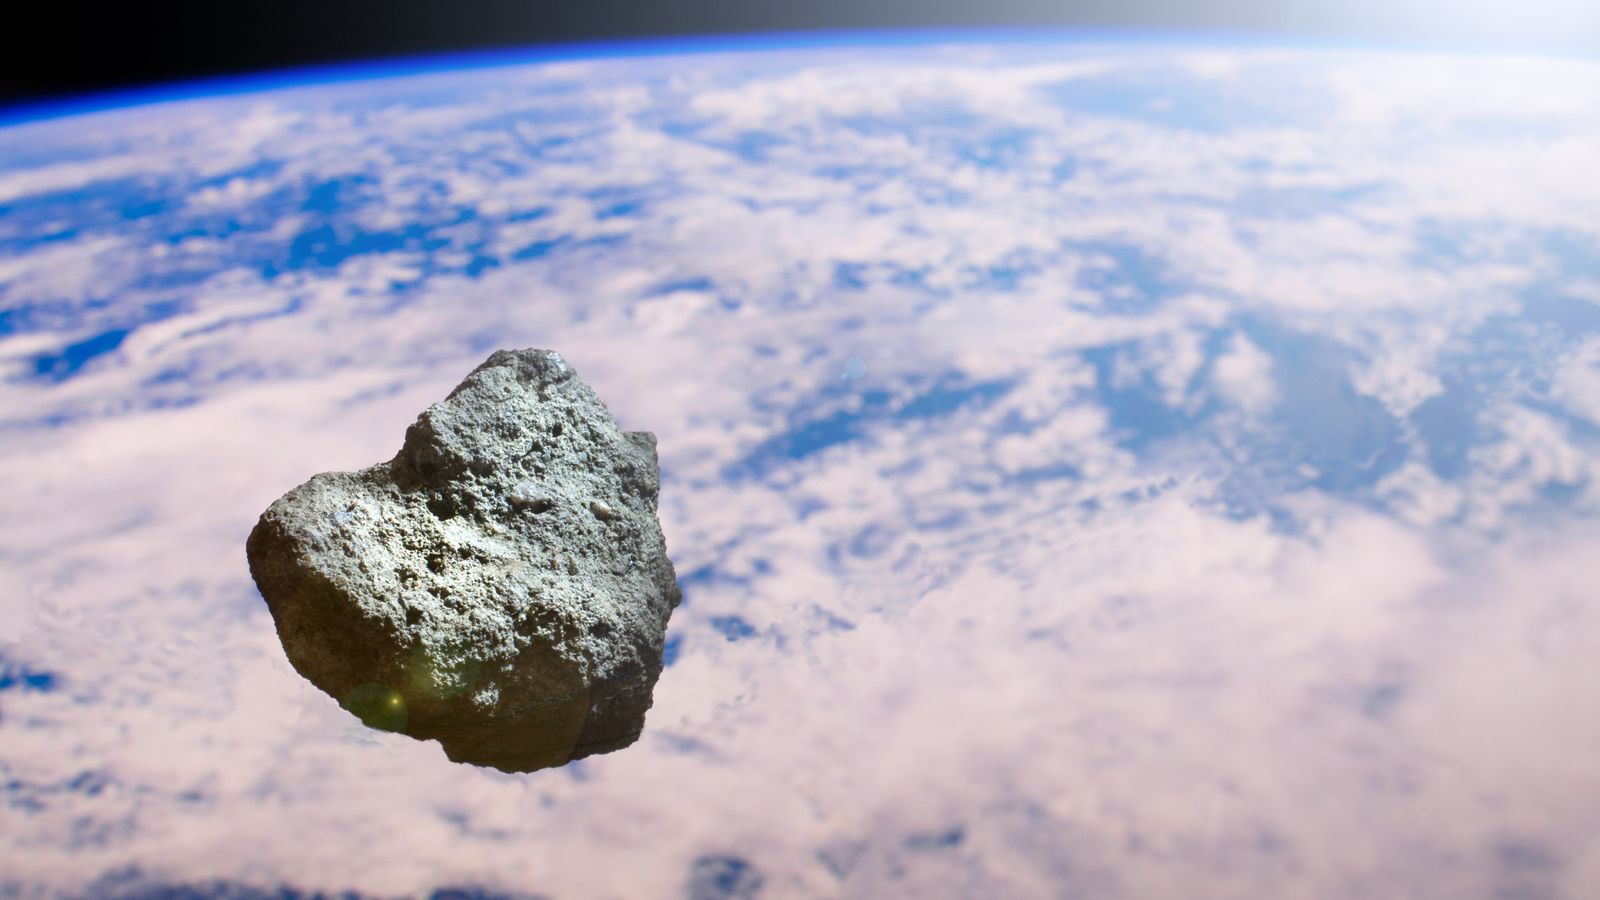 Asteroid to pass between Earth and moon in 17,500mph close encounter